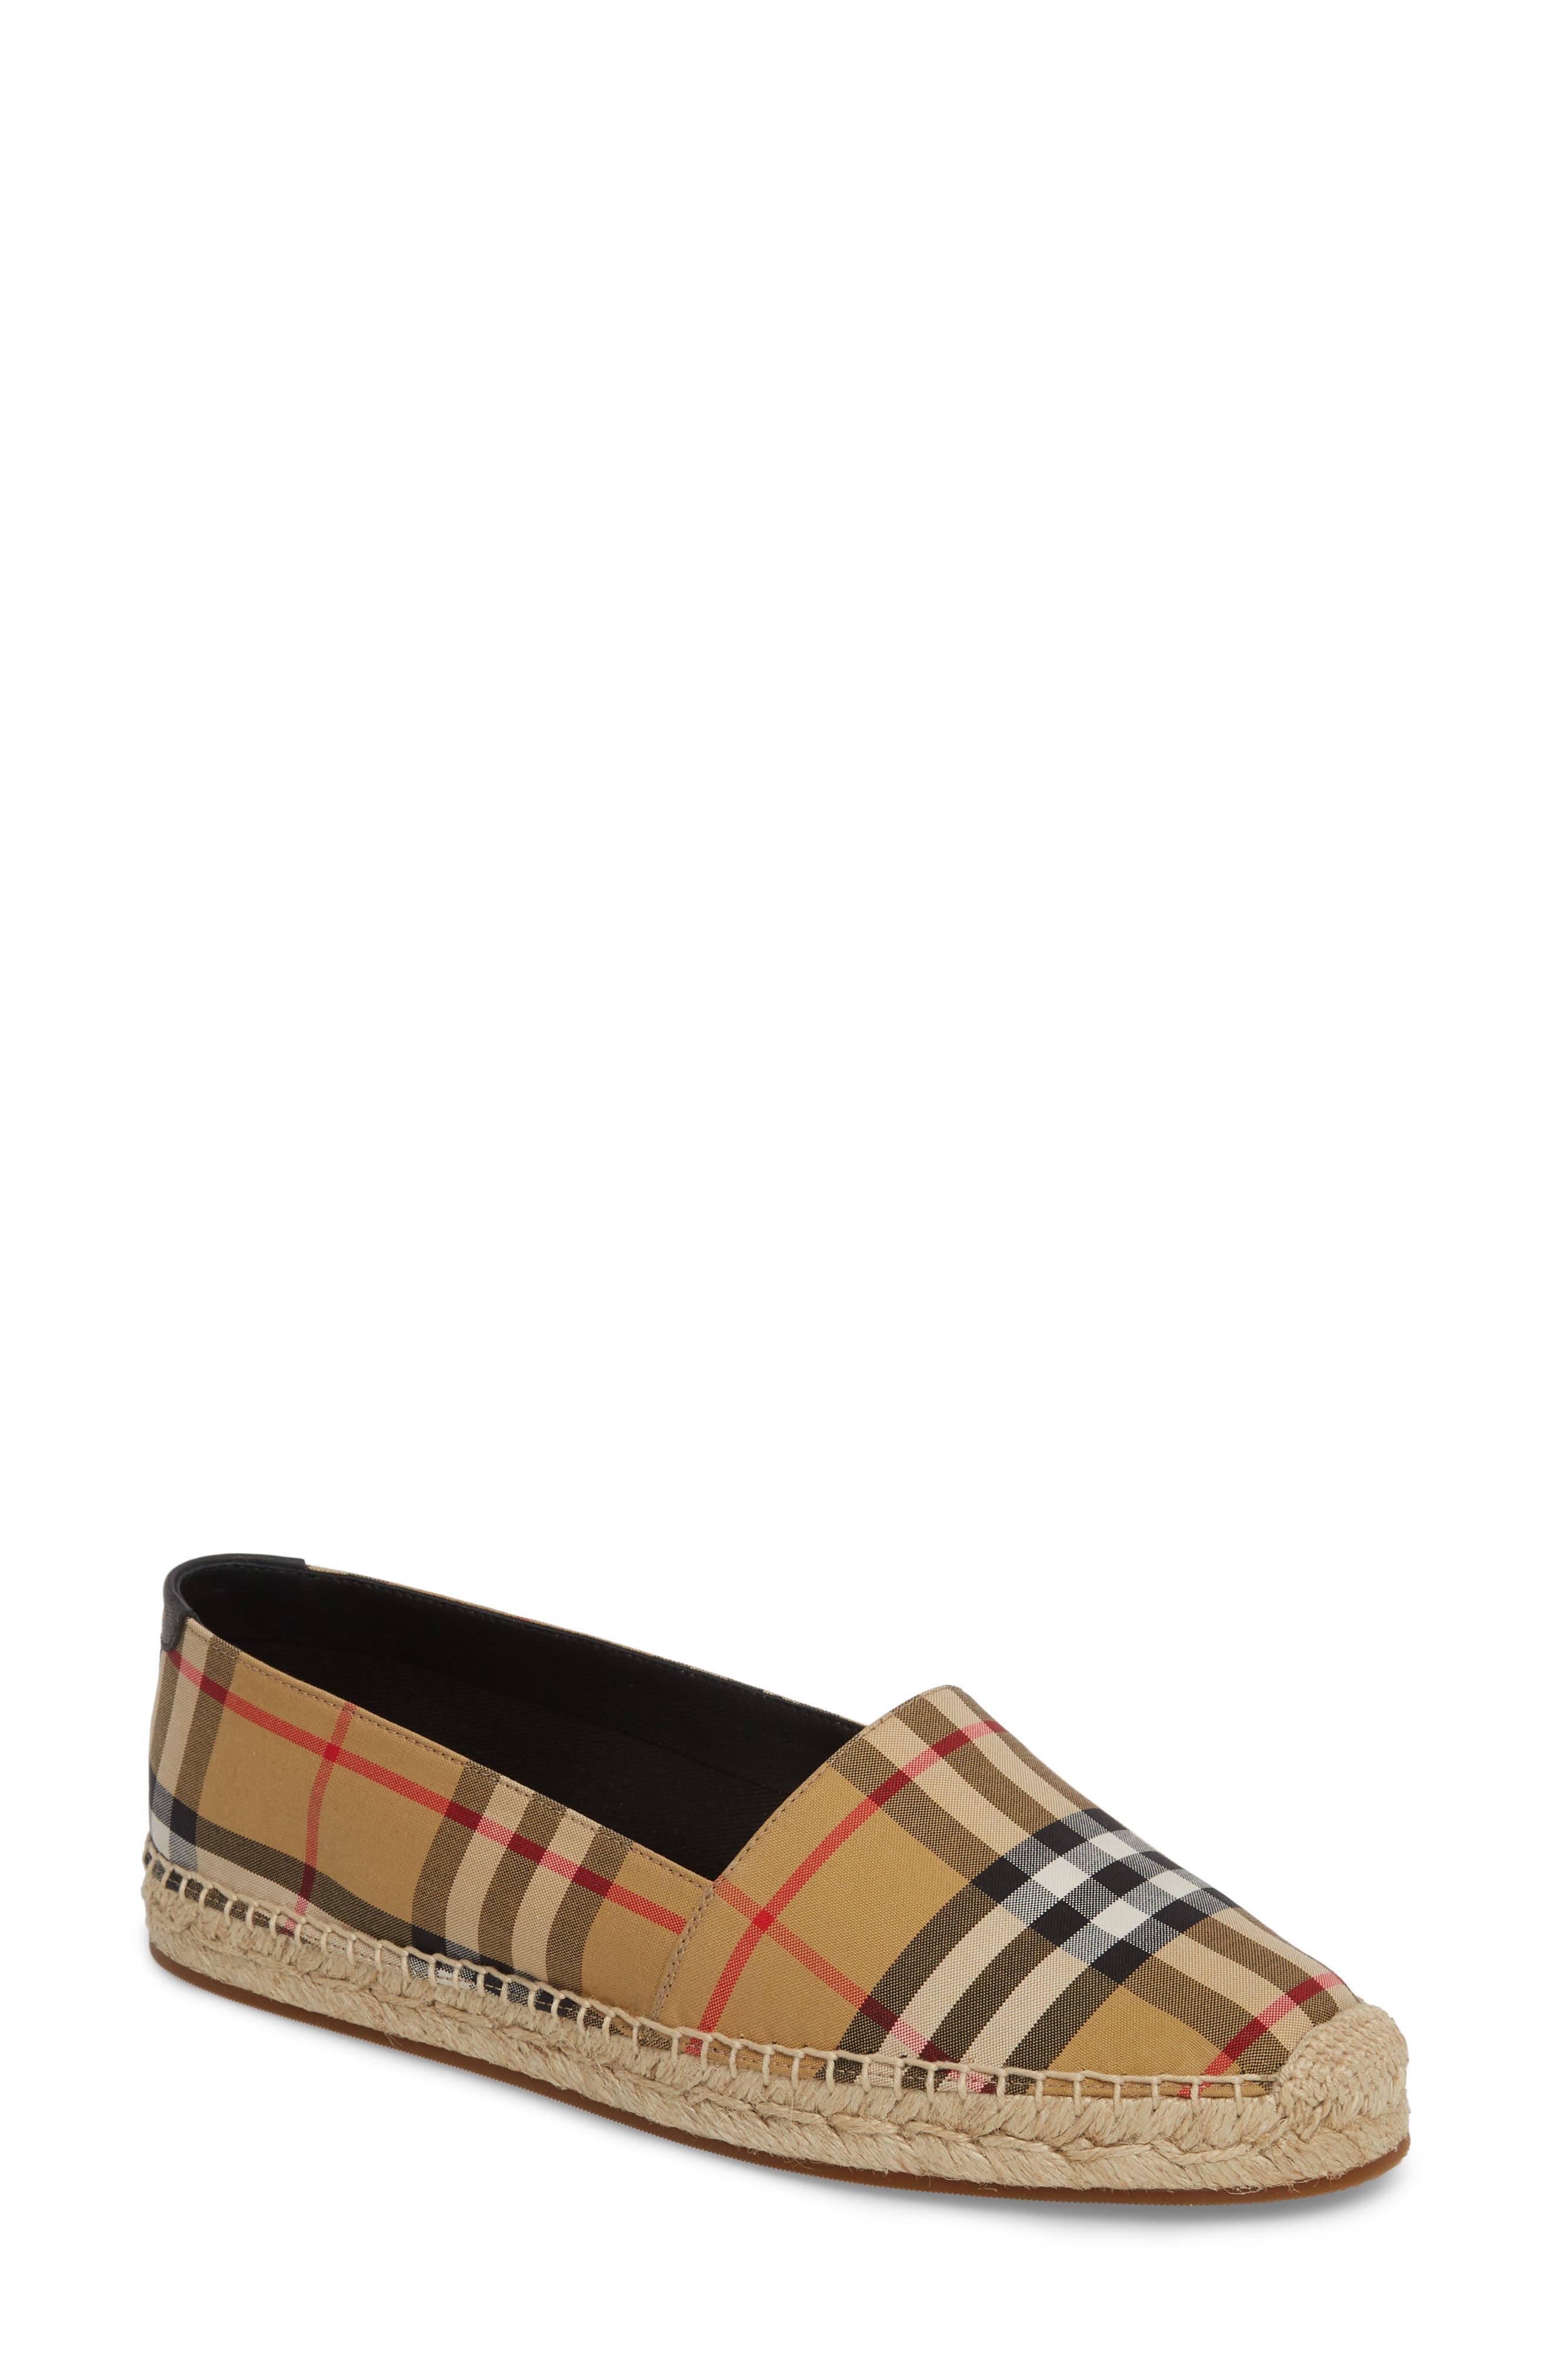 burberry clemence boots